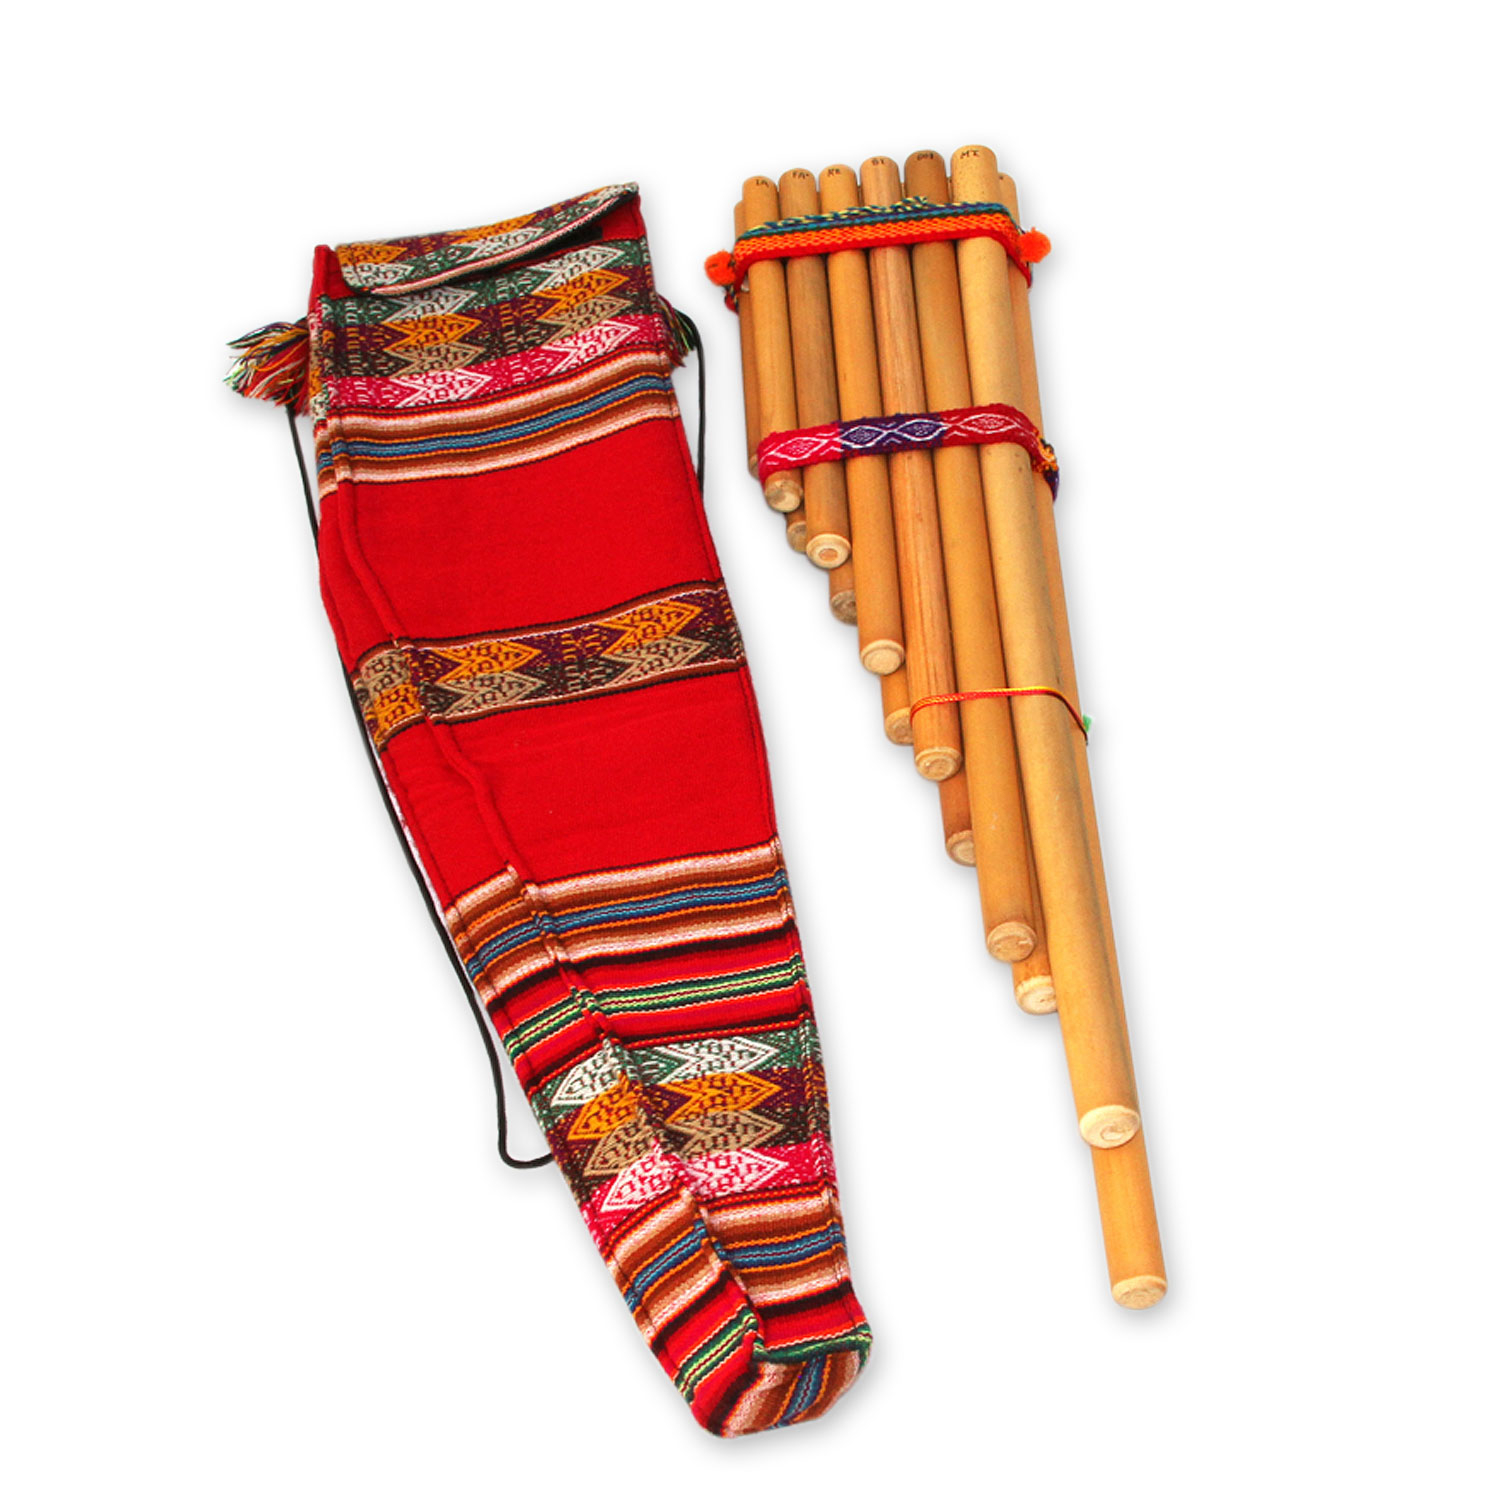 andean panpipes